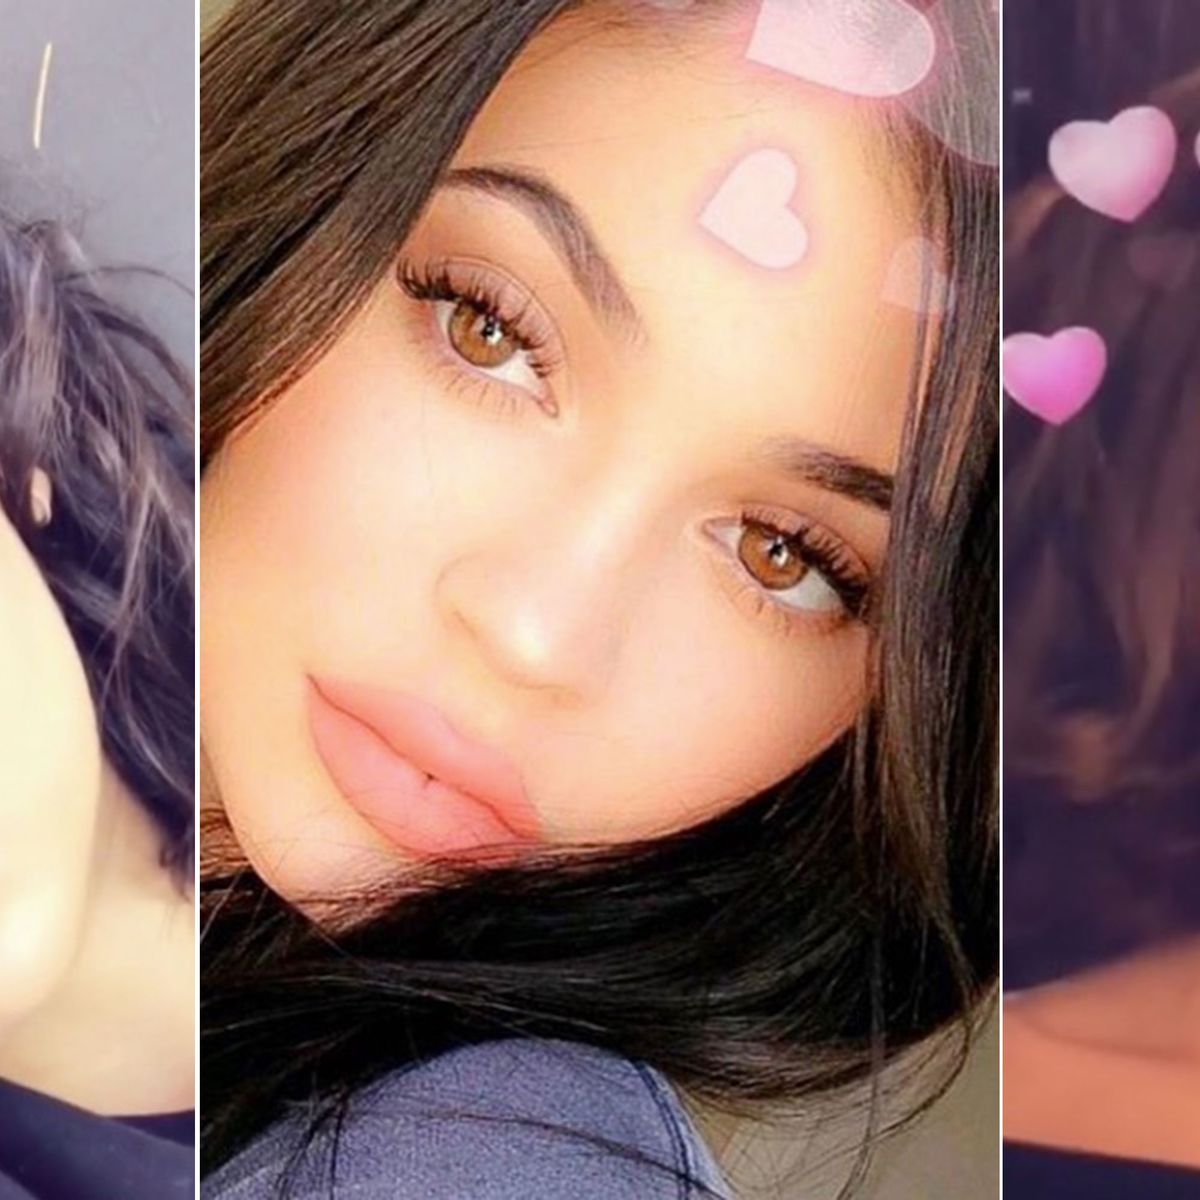 Millennials are getting plastic surgery to look like Snapchat filters